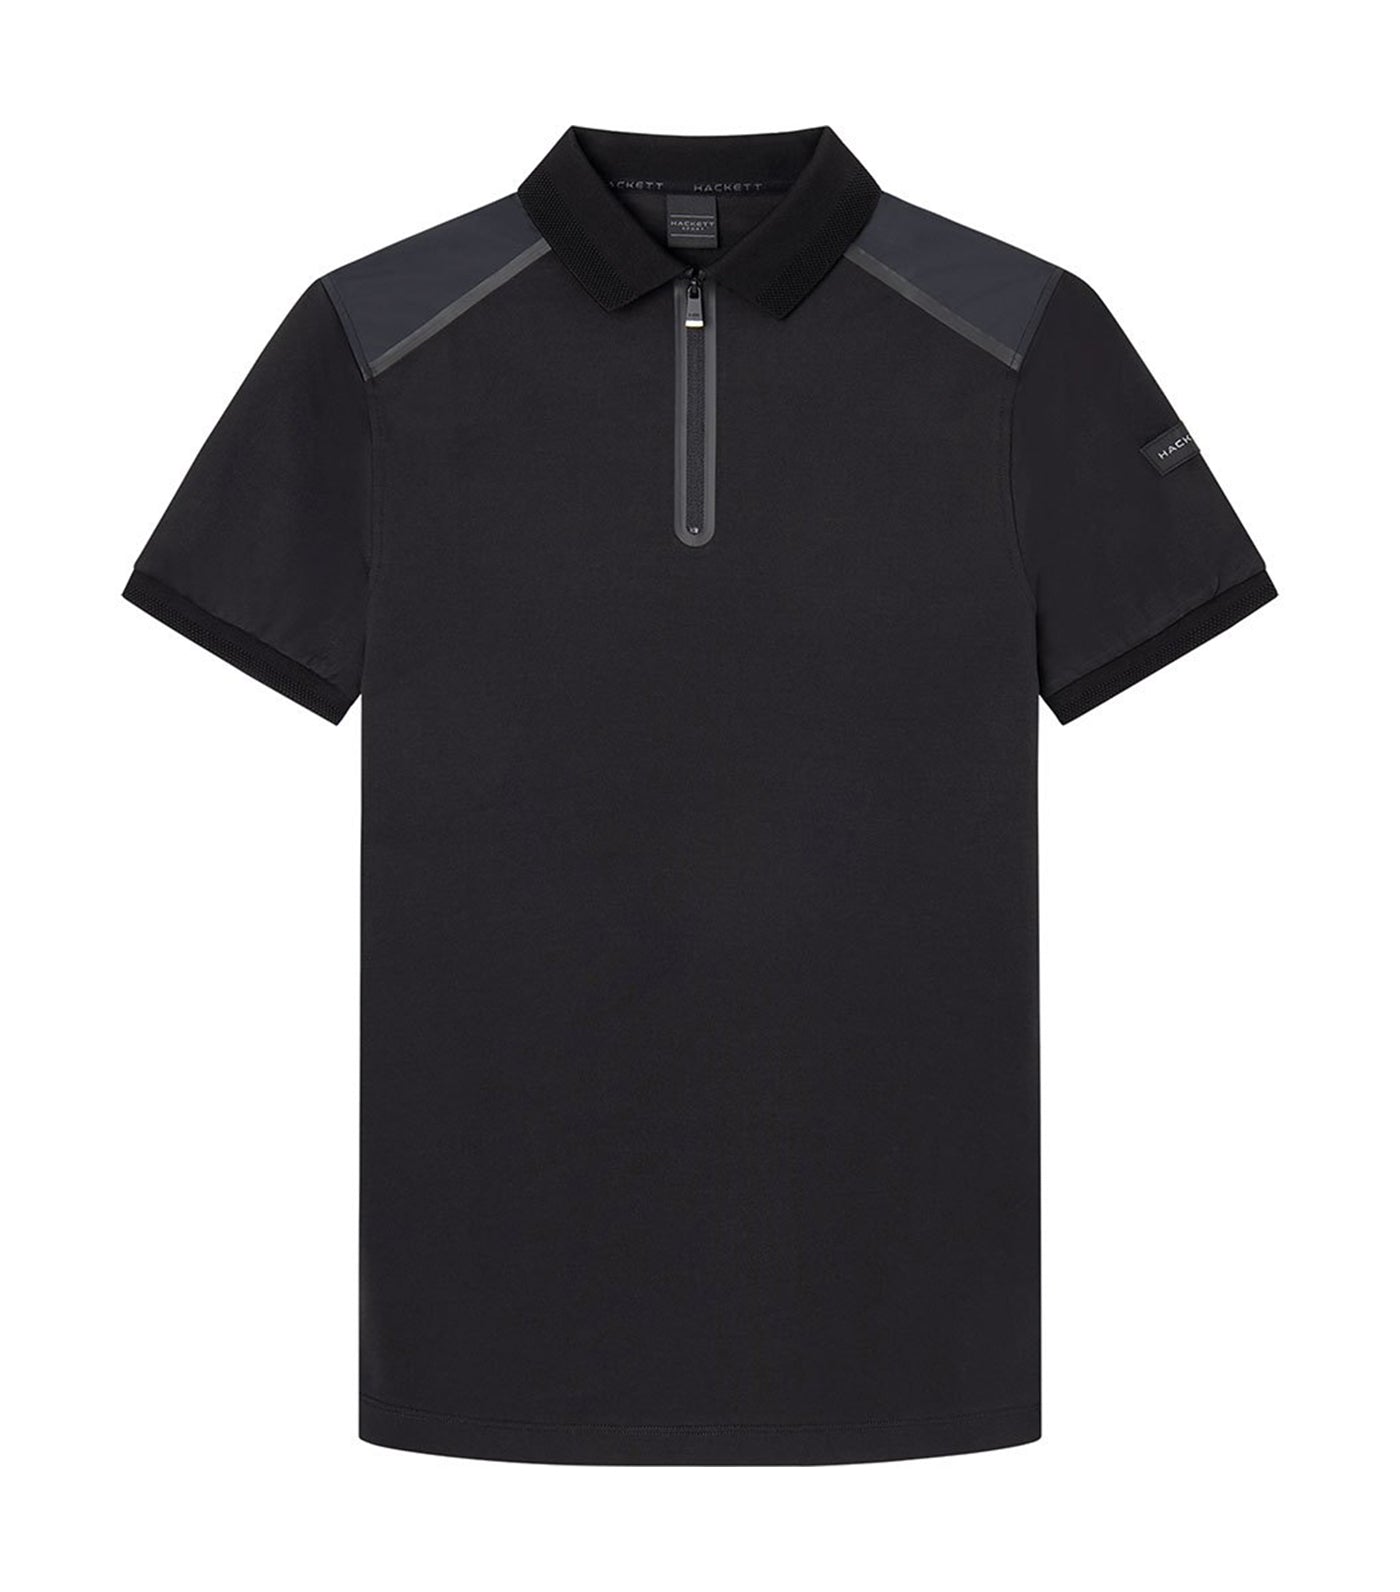  Calvin Klein Men's Move Tech Pique T-Shirt, Black Beauty, Extra  Small : Clothing, Shoes & Jewelry